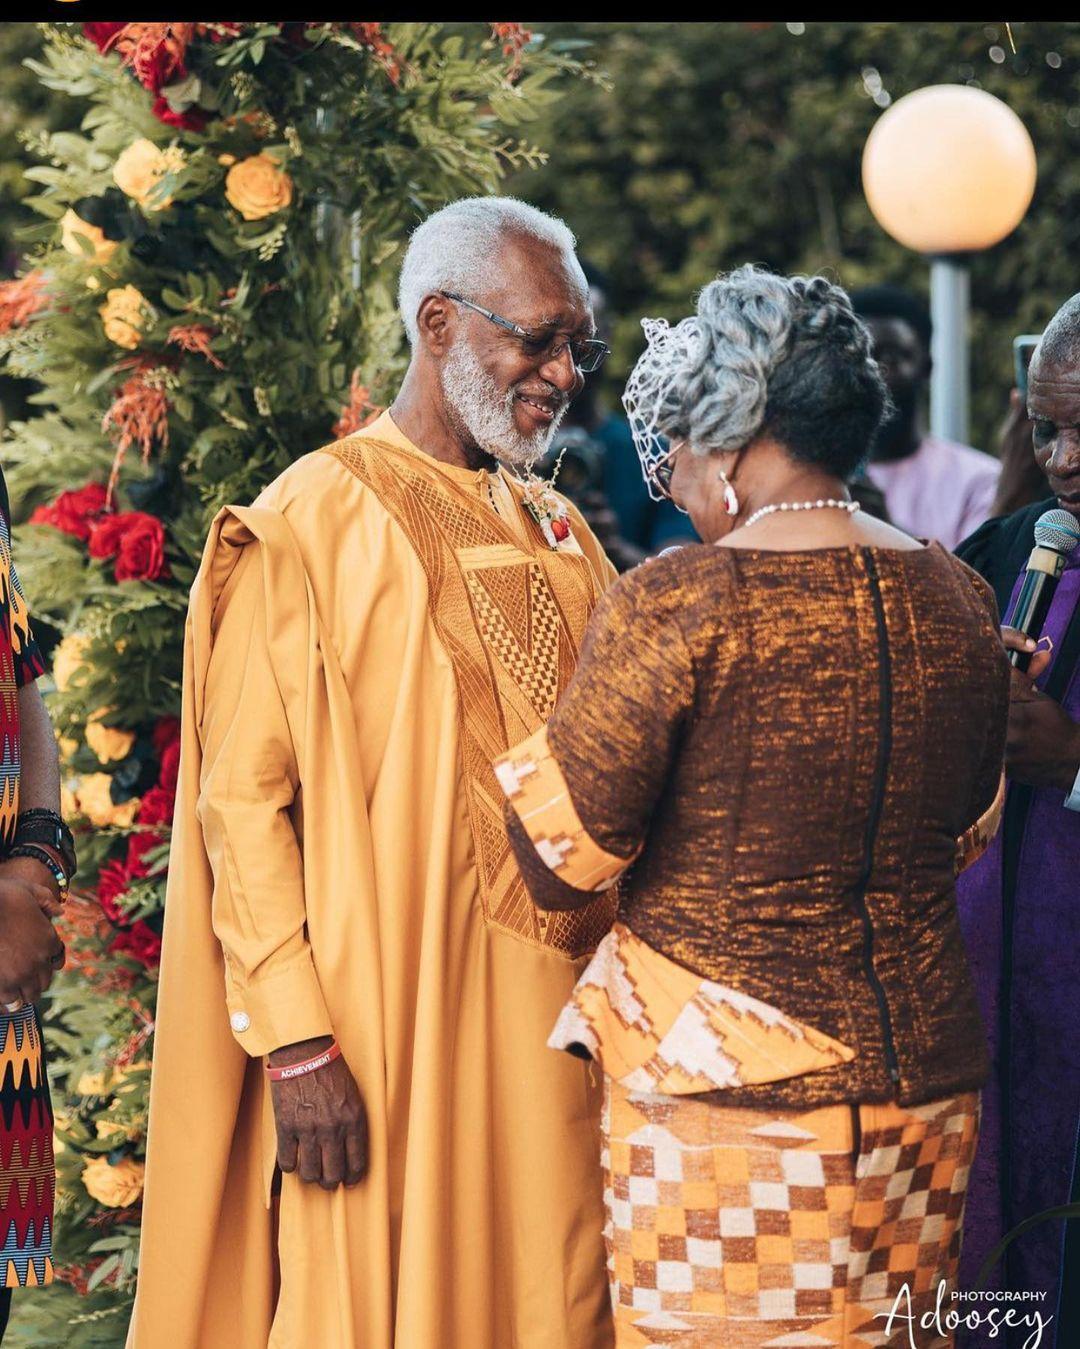 class="content__text"
 Ever wondered what 60yrs of marriage looked like?😍❤️

John &amp; Robenia’s 60th wedding anniversary and vow renewal

Groom outfit: @coverboygh_ 
Wear the brand coverboygh 
___________________________________

_________________________________________________________________
Outfit: @coverboygh_ 
Fabric : @themixtextiles 
_________________________________________________________________
Your looks, Our Pride 👑🎯❣️
For booking and pricing call or Whatsapp +233 20 731 4221 , +233 20 731 4221
_________________________________________________________________

Grooms outfit: @coverboygh_ 
Photographer: @shotbyadoosey 
Planning &amp; Coordination: @purpletwirlevents 
Event design &amp; decor: @philipmerevents 
Videography: @prosvid .
Catering: @sunlodgehotel 
Venue: @villateranga 
MC: @georgebannerman 
DJ: @di_selorm 
Brides outfit: @cyndoscollection 
Guests' outfits: @sedinamhop 
Fascinator: @hatboxco 
Drinks: @abbeeschillbox 
Cocktails: @wheelbarogh 
Live Streaming: @aseyehtv 

_ _________________________________________________________________

Follow our pages 
Styling page : @coverboykobby 
Clothing brand : @coverboygh_ 
Footwear’s brand : @coverboyshoes_ 
Modeling agency: @malex_modelling_agency_ 
Drip together with the Dripgod 💧 @_dripgod_ck_ 

___________________________________
 #wedding #prewedding #brideandgroom #love #ukwedding #nigerianweddings #nigerianwedding #ukweddingphotographer #ghanawedding #bellanaijaweddings #idoghana #bride #wedding #weddingphotography #london #africanwedding #shotbyadoosey
 #purpletwirlevent #60thanniversary #vowrenewalceremony #vowrenewal #receptionparty #africanamerican #couple #ghanaparty #weddingplanningghana #ghanabride #purpletwirlevents #purpletwirlwedding #ghanawedding #ghanaweddingvendors #ghanaweddingplanner 
 